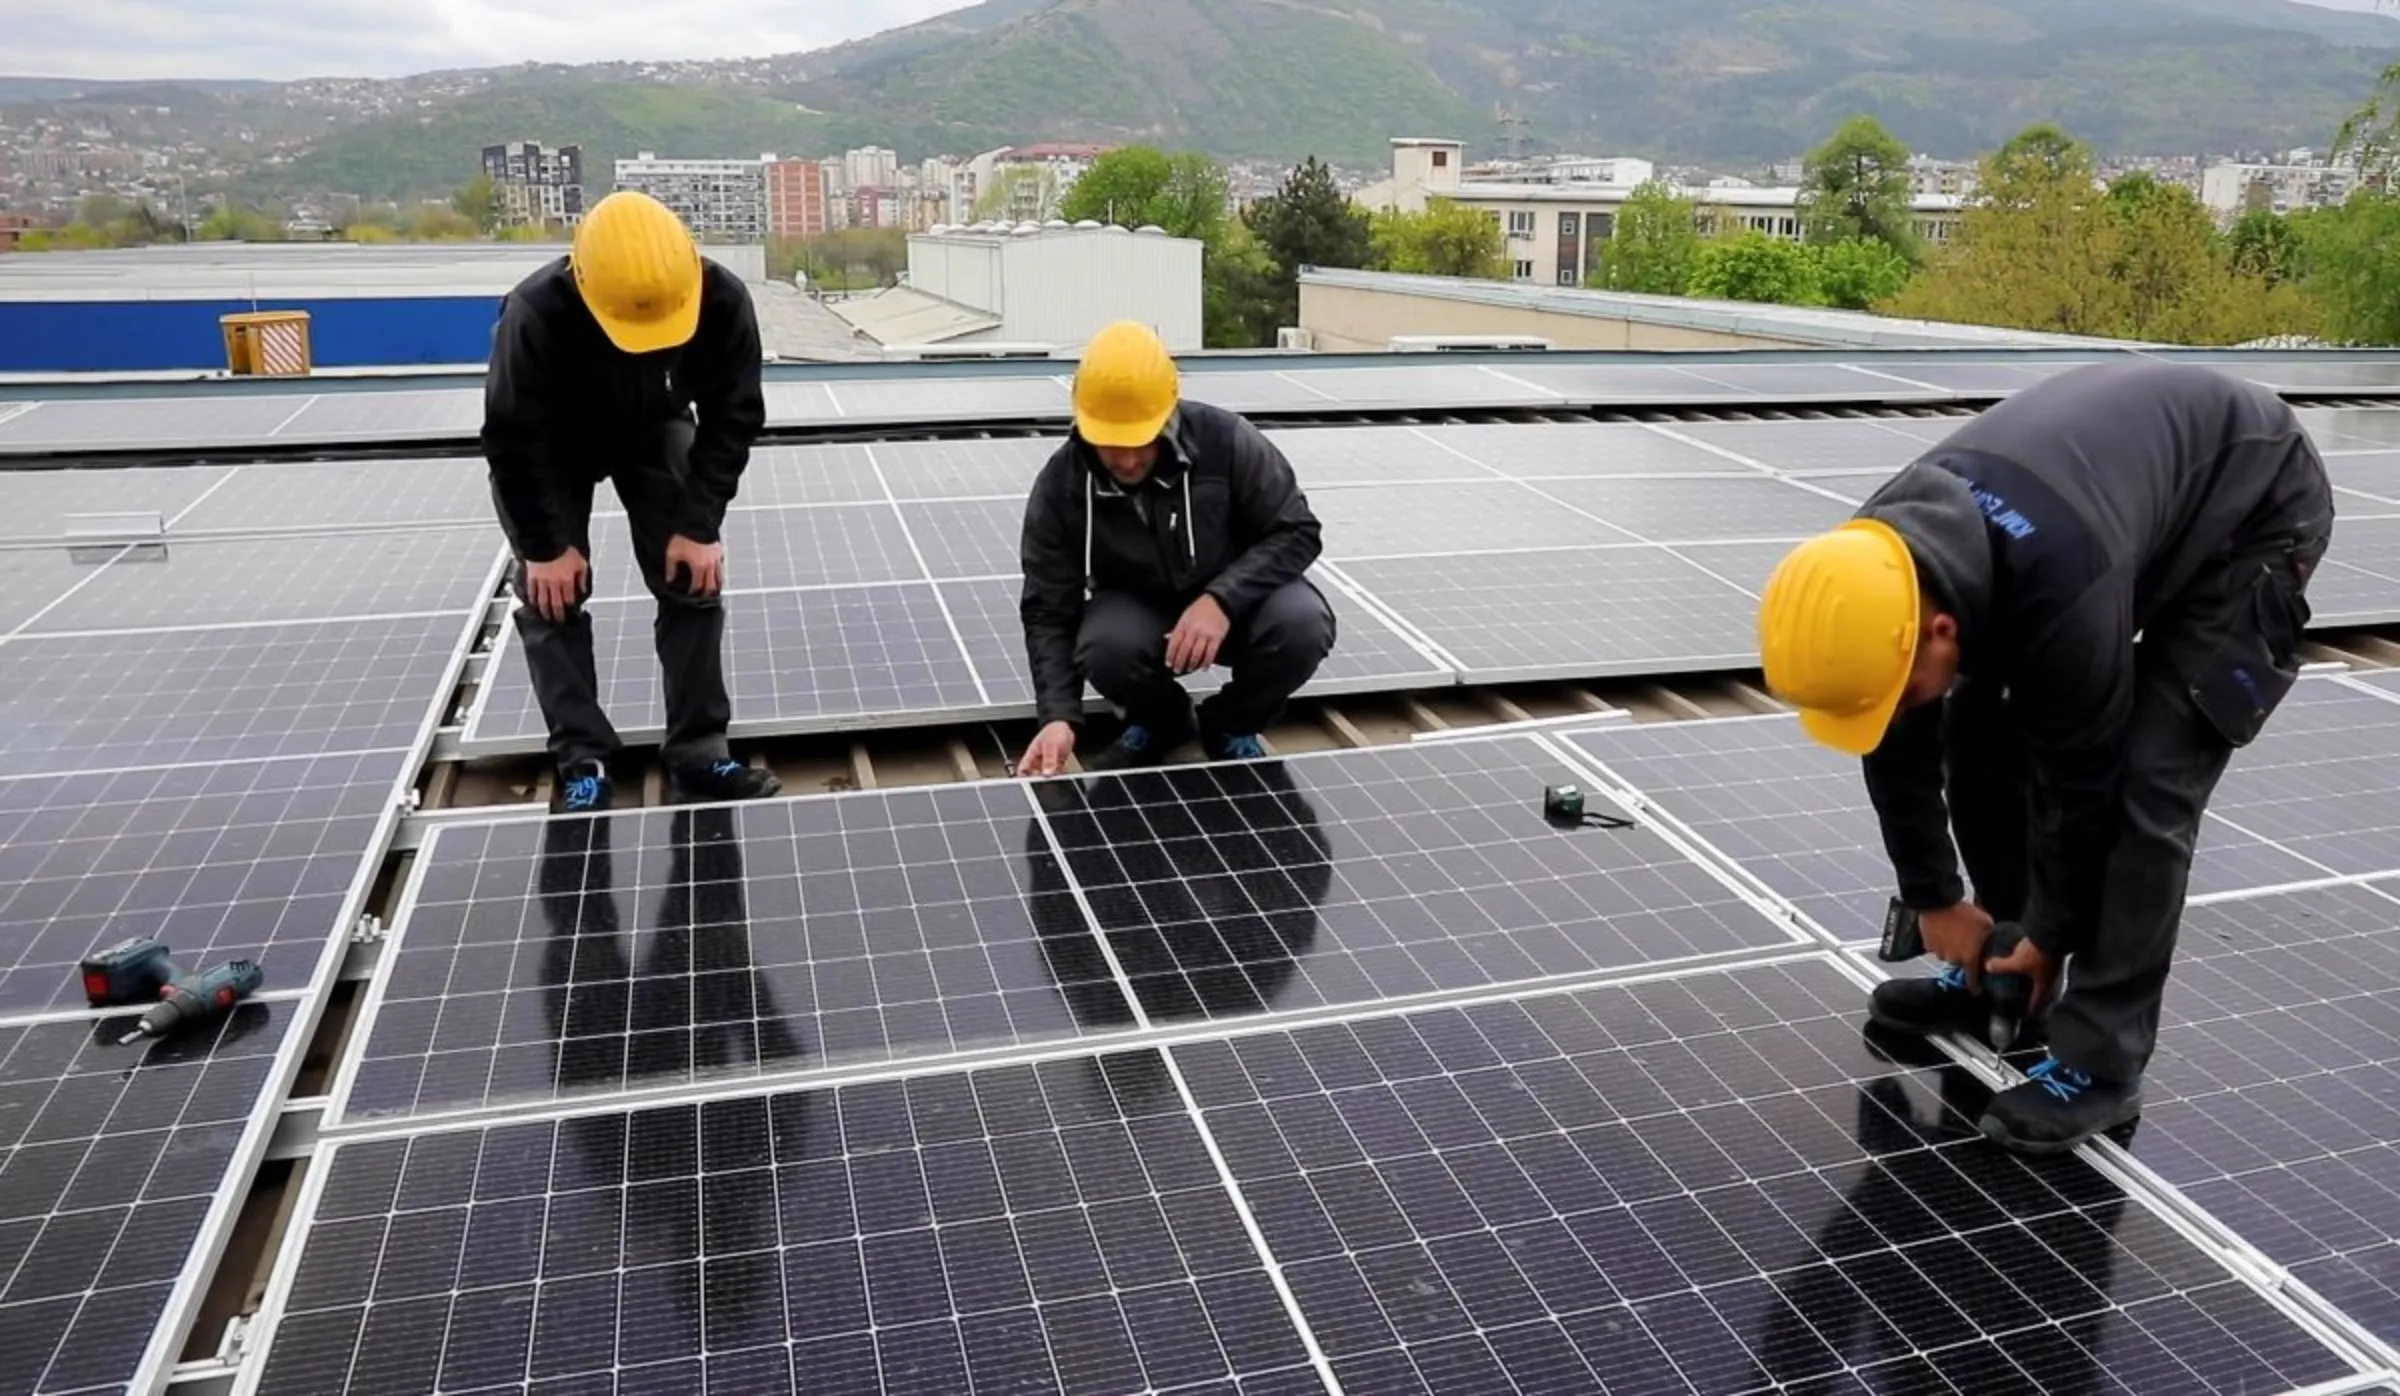 Workers install solar panels on an office building in Skopje, North Macedonia April 19,2023. REUTERS/Ognen Teofilovski